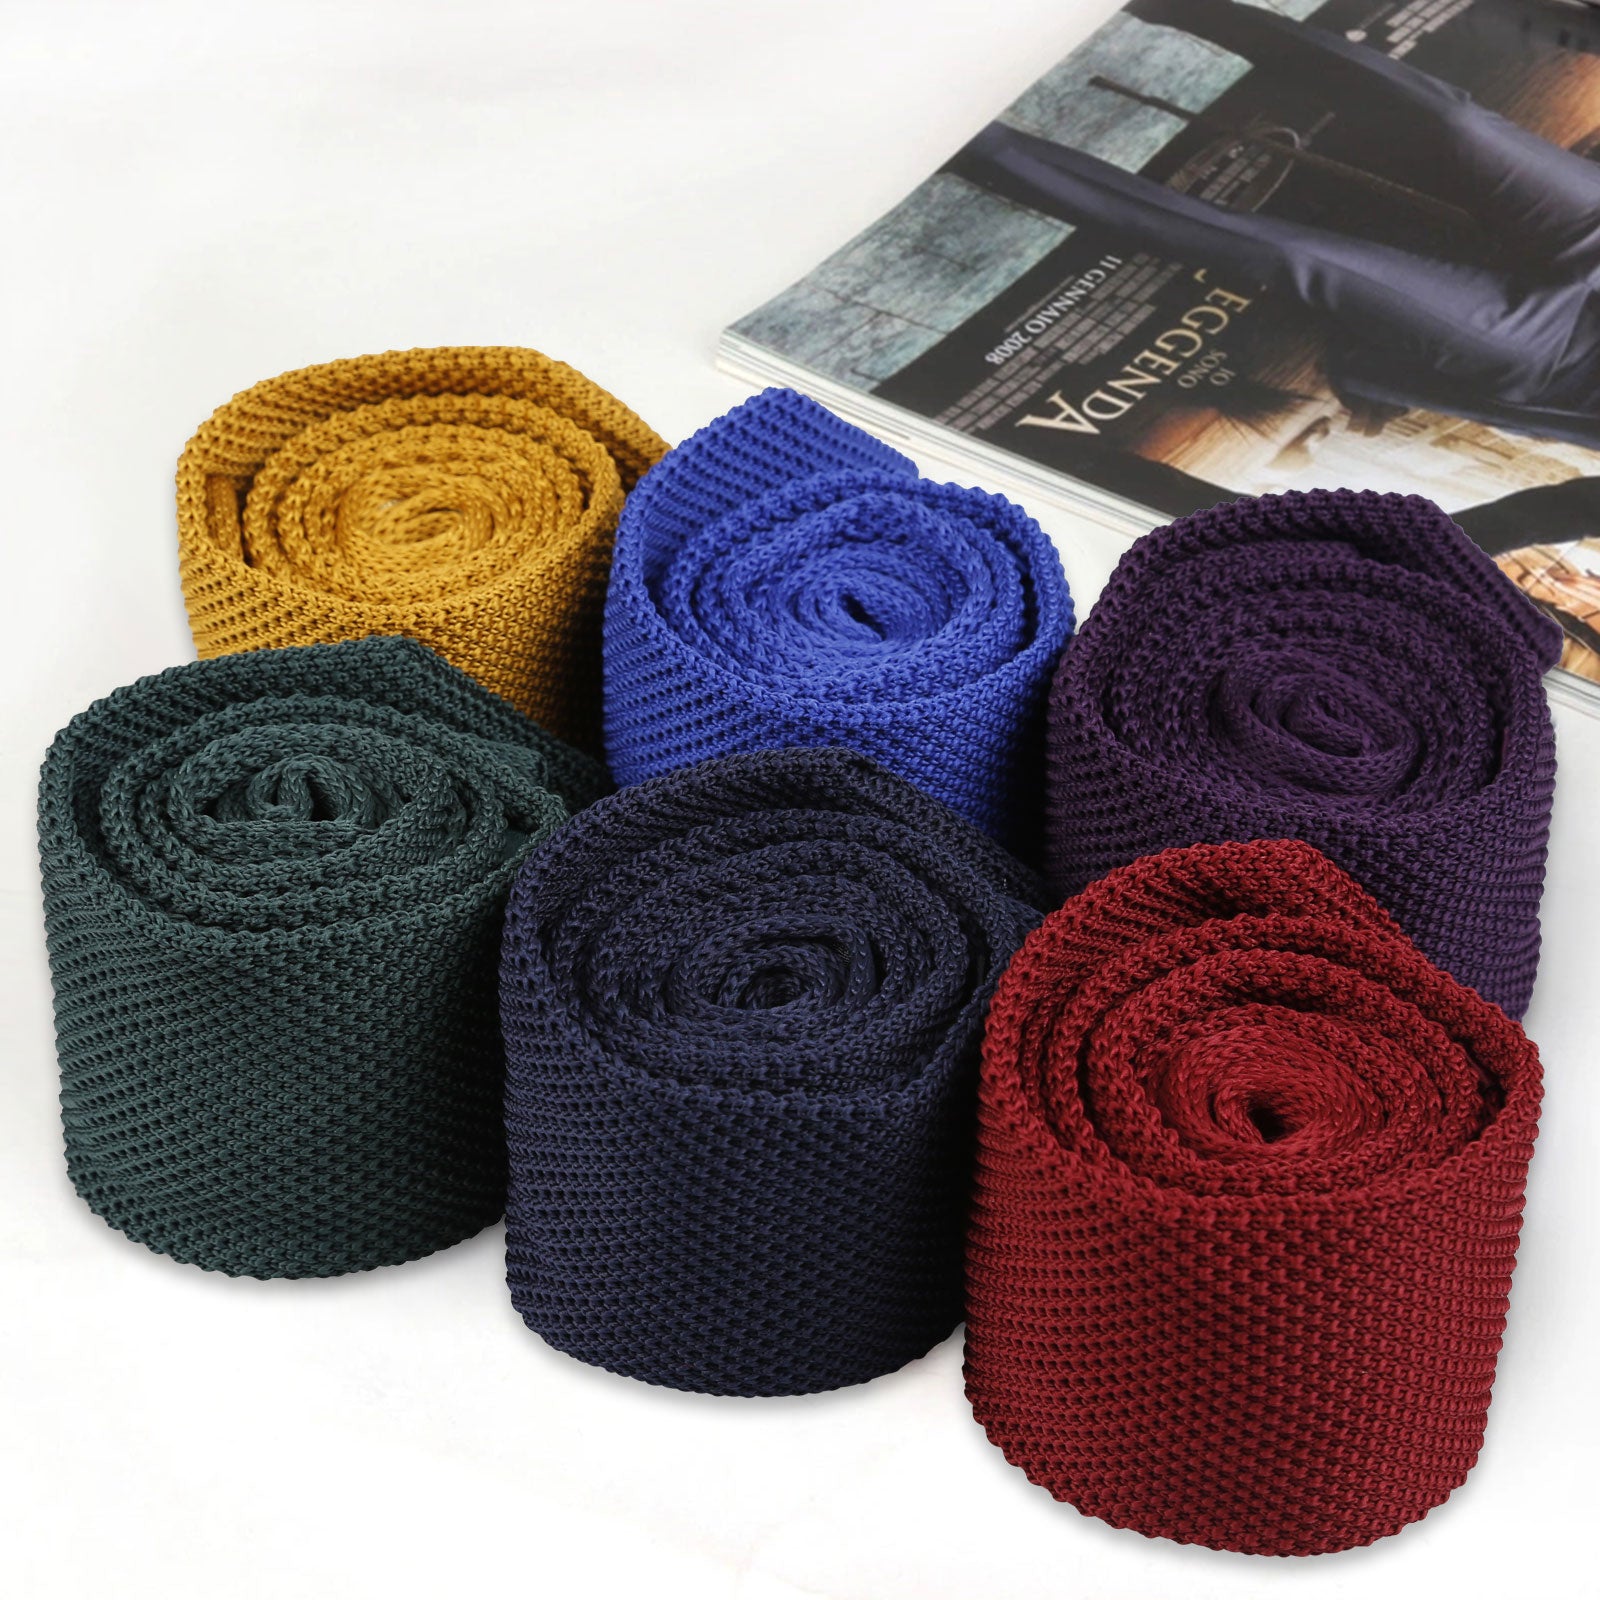 Men's Vintage Multi-colored Casual Knitted Neckties #118